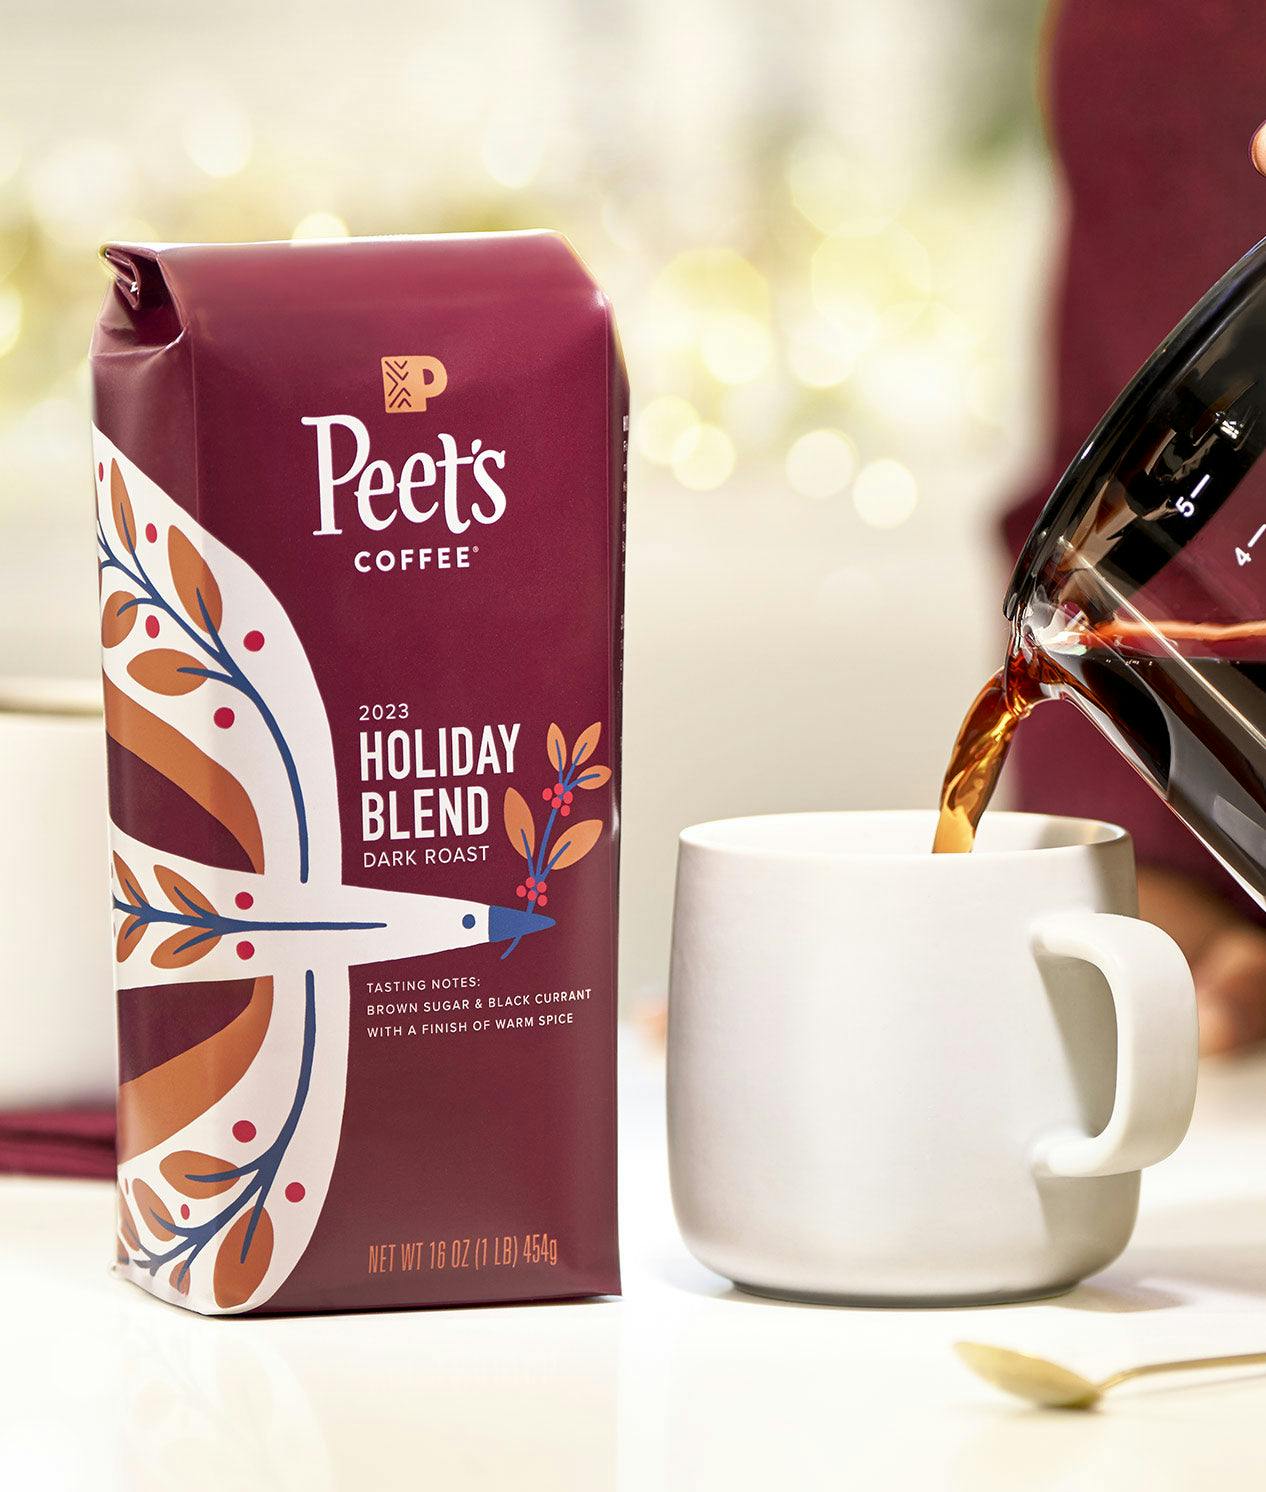 https://peets-shop.imgix.net/files/PDP_Holiday_Blend_Secondary-1266x1492.jpg?v=1696368772&auto=format,compress